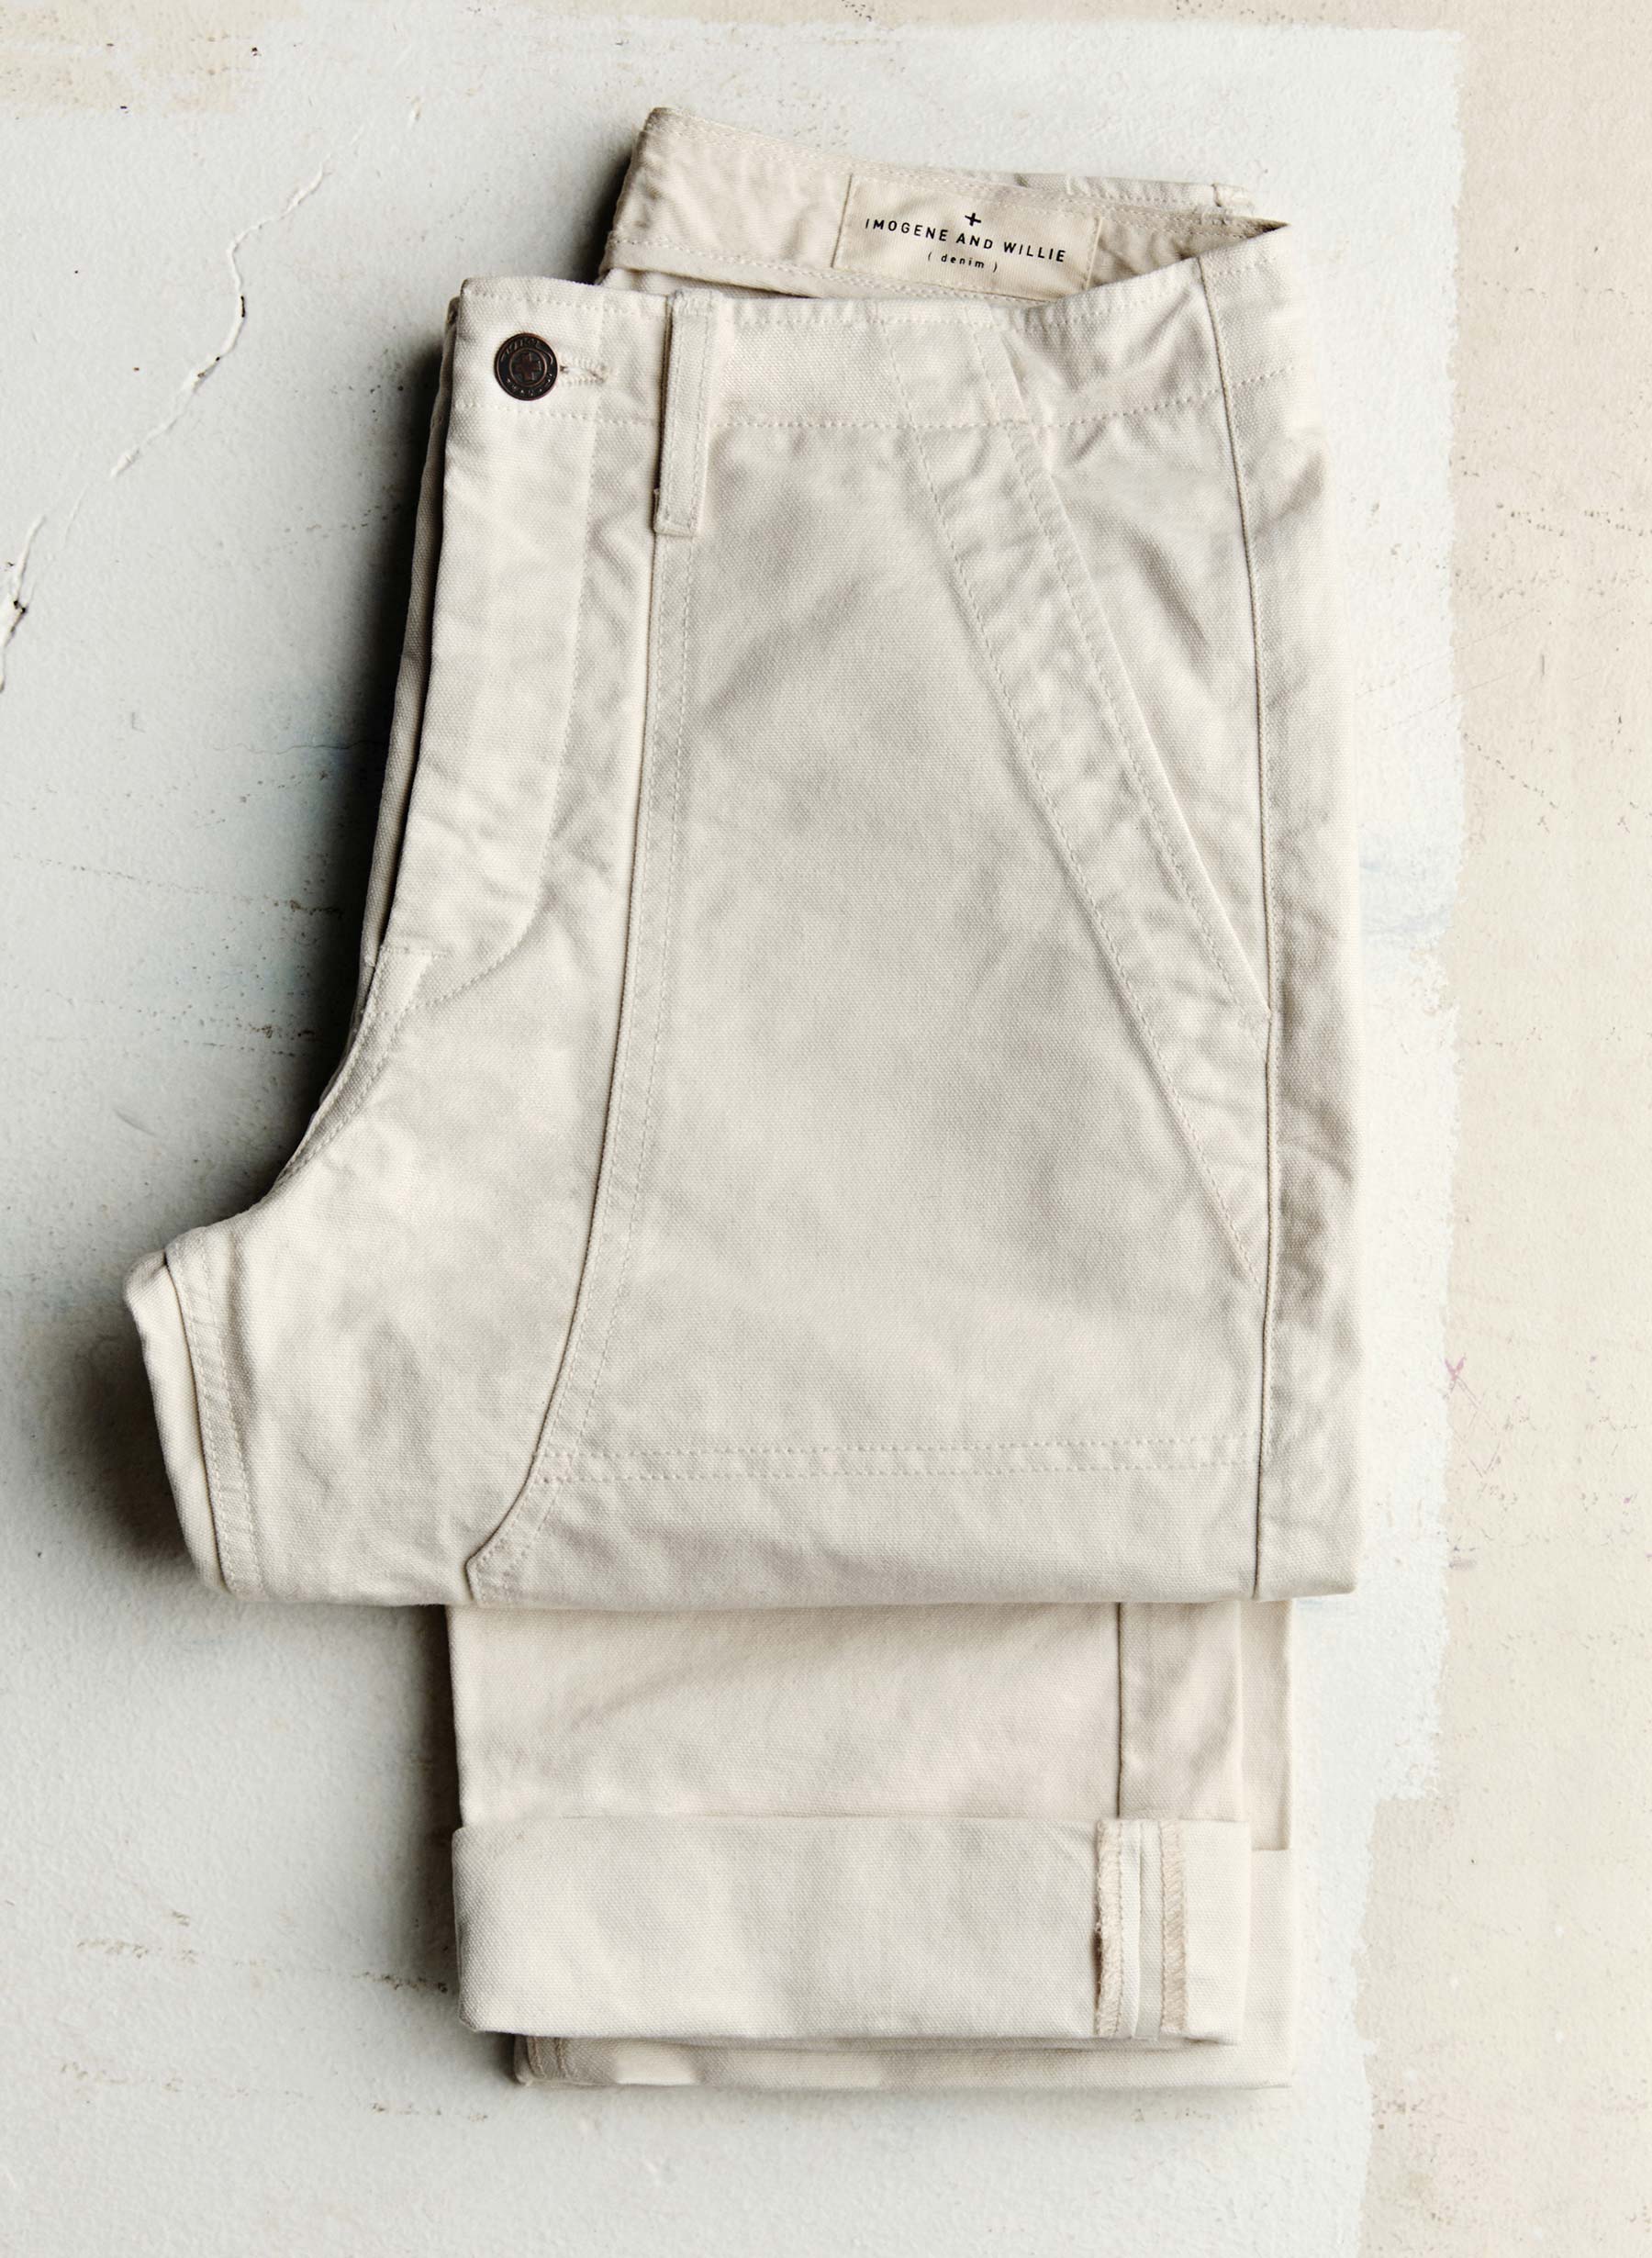 Women's Airplane Pant made with Organic Cotton